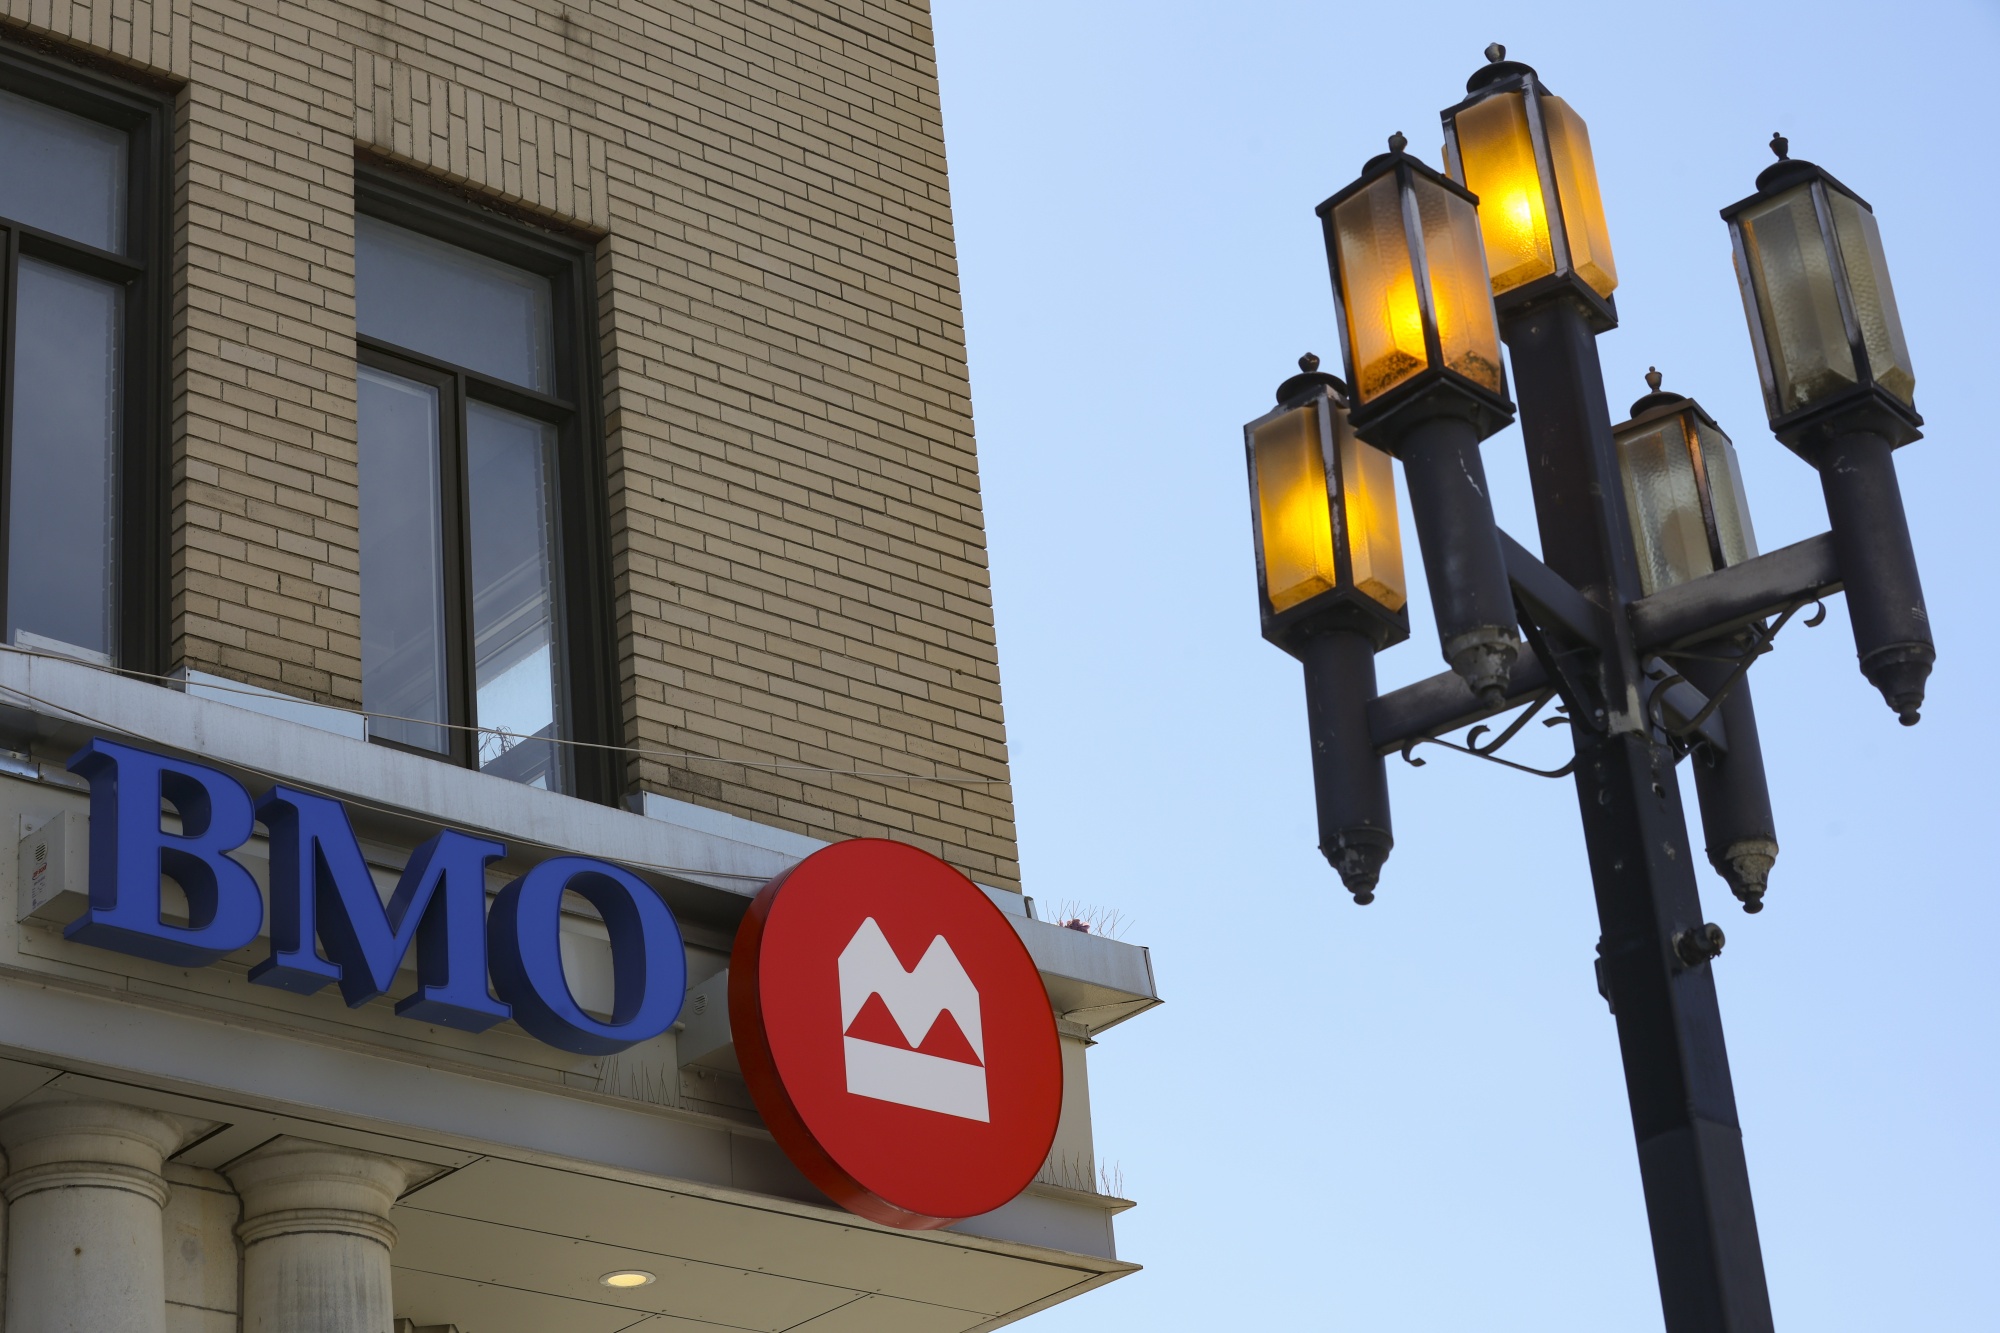 A Bank of Montreal&nbsp;bank branch in Quebec, Canada.